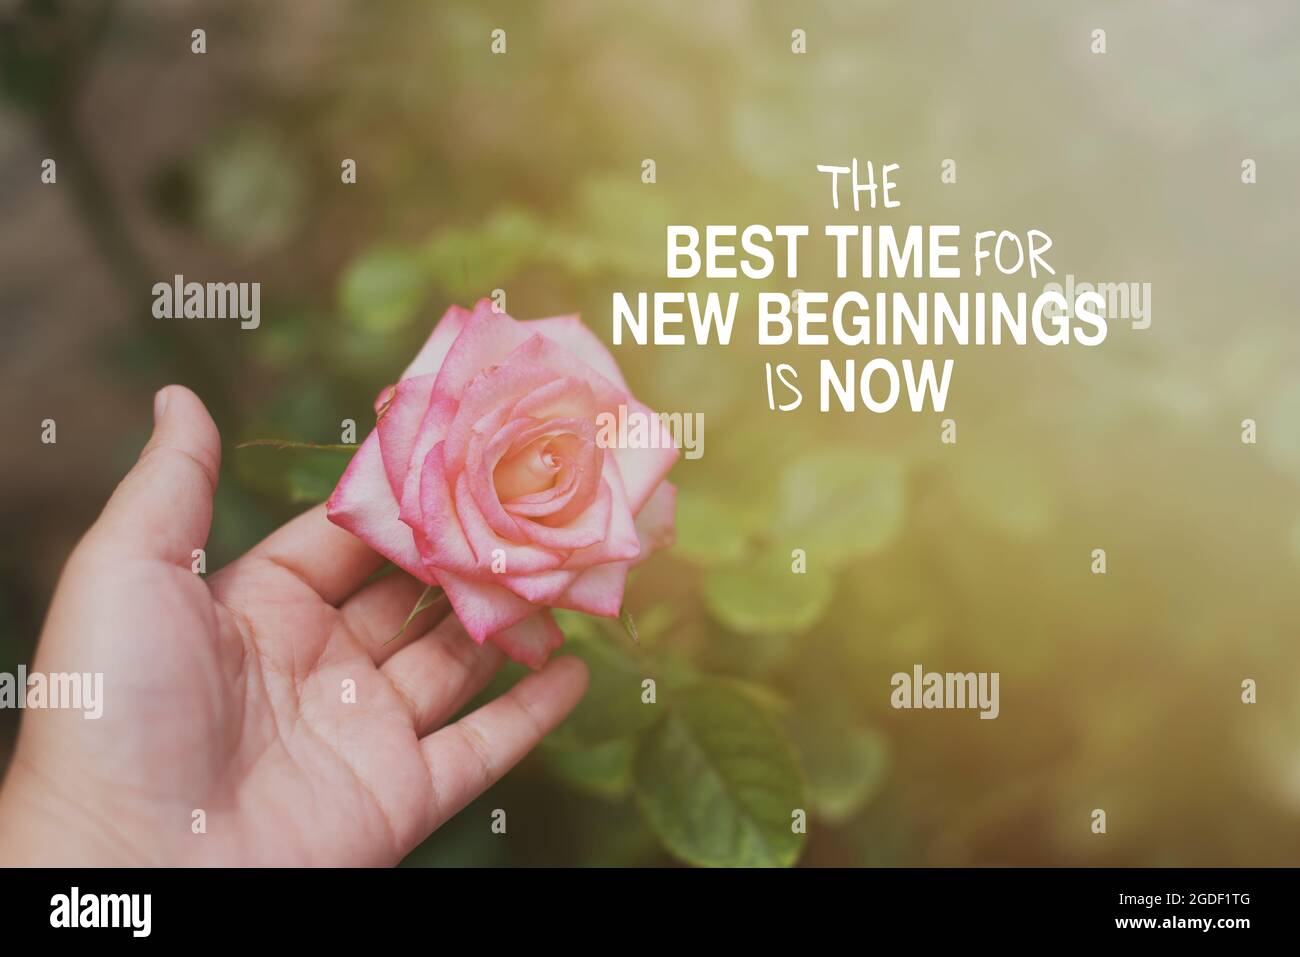 Motivational and Inspirational Quotes - The best time for new beginnings is now. Stock Photo